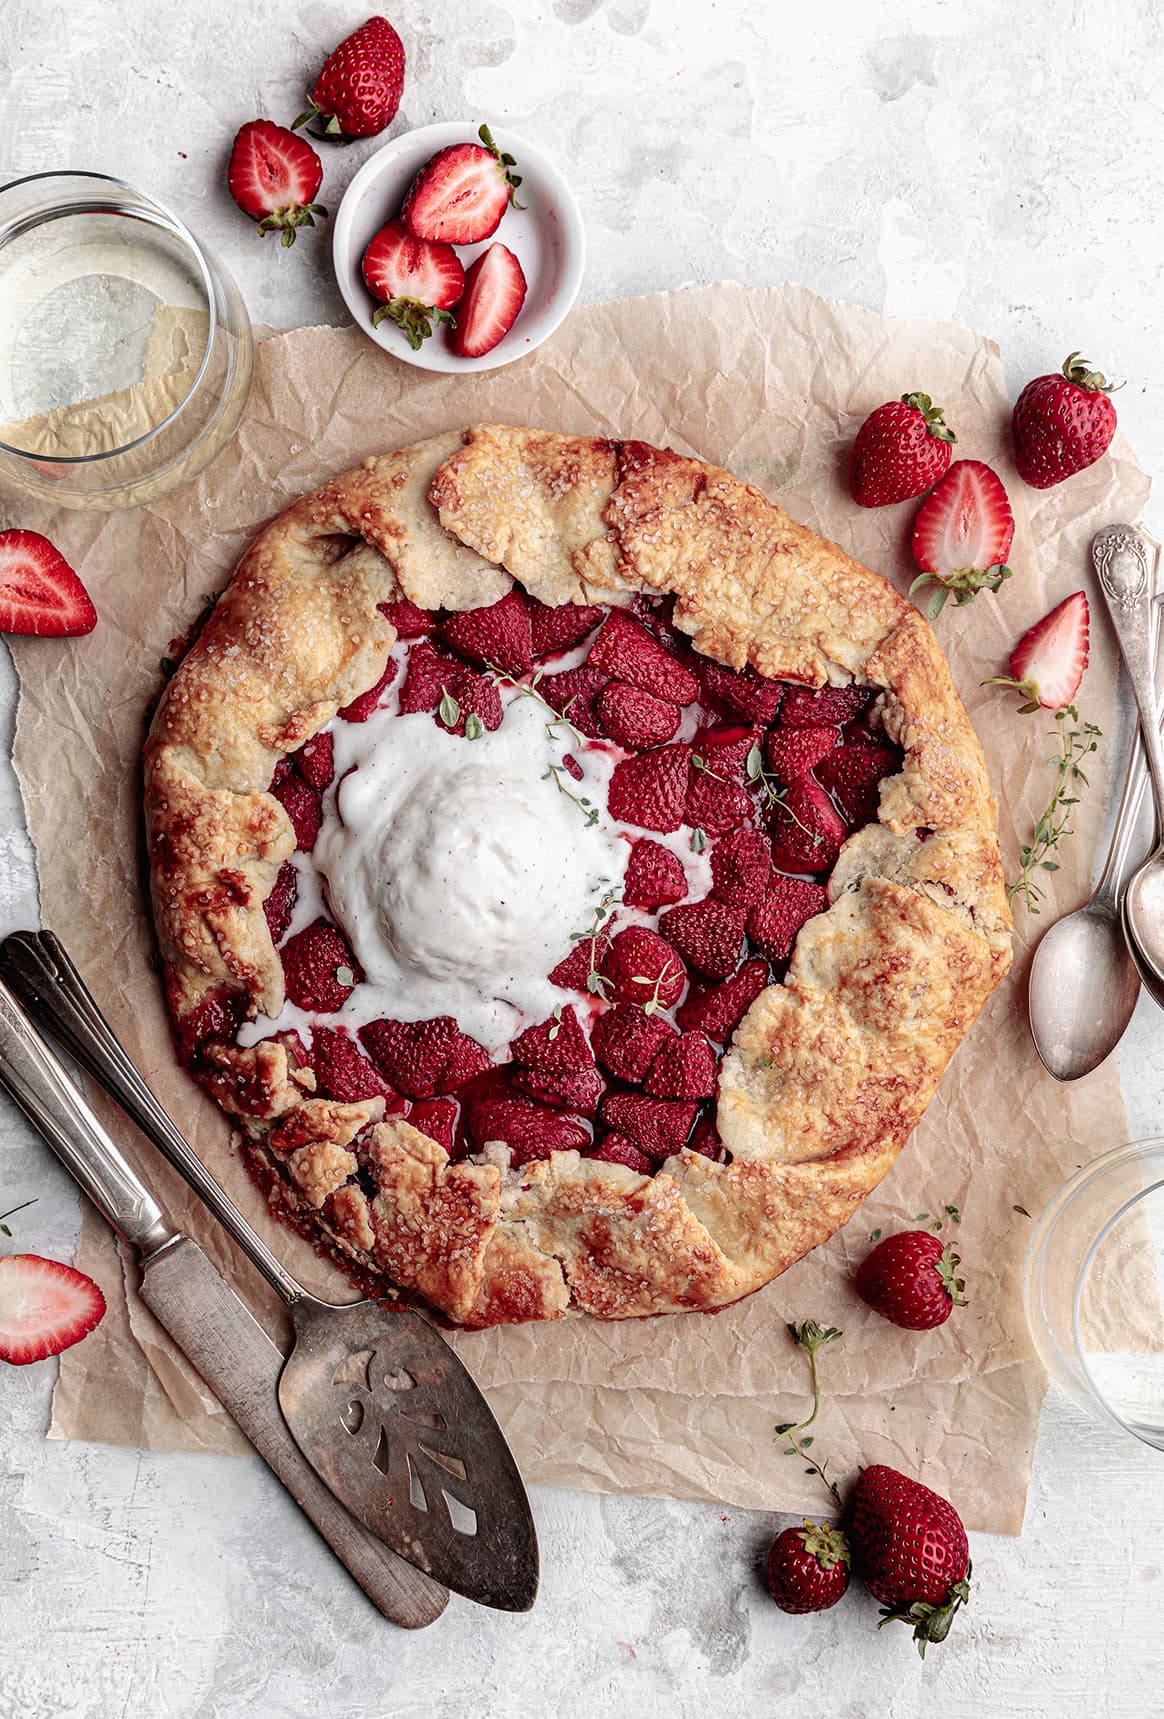 A rustic strawberry galette made with puff pastry, fresh berries and honey. This galette is the perfect late summer night dessert and even better when served with vanilla ice cream.